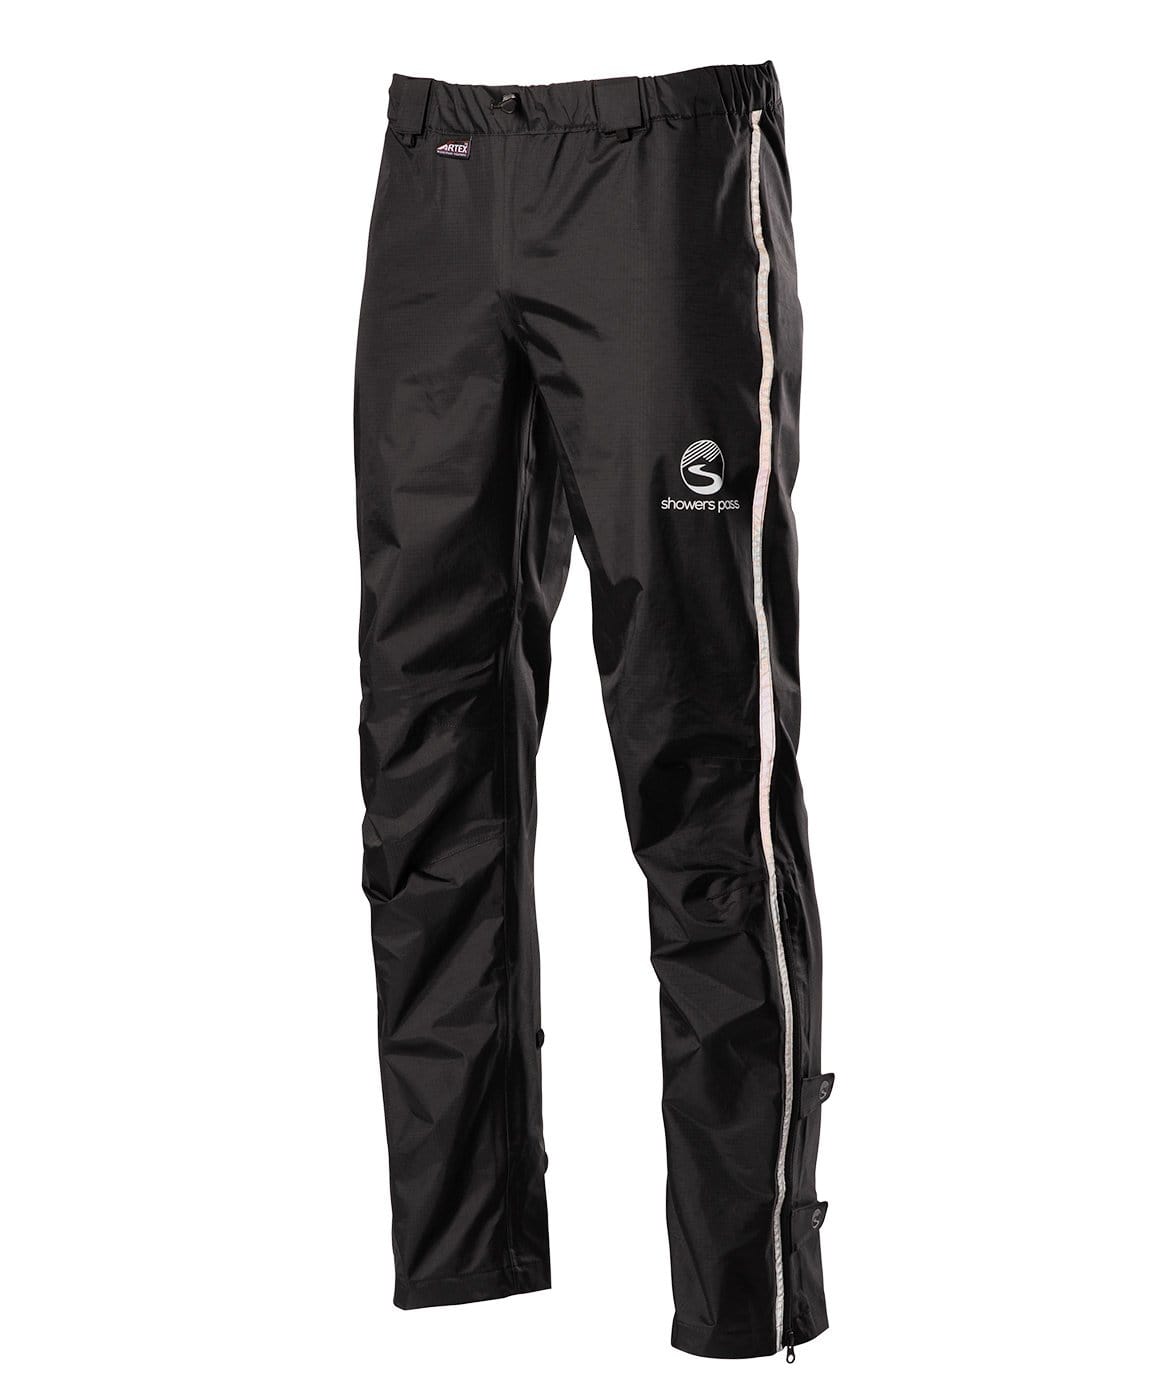 12 Pieces - Men's Tracksuit with Reflective Trim in Black